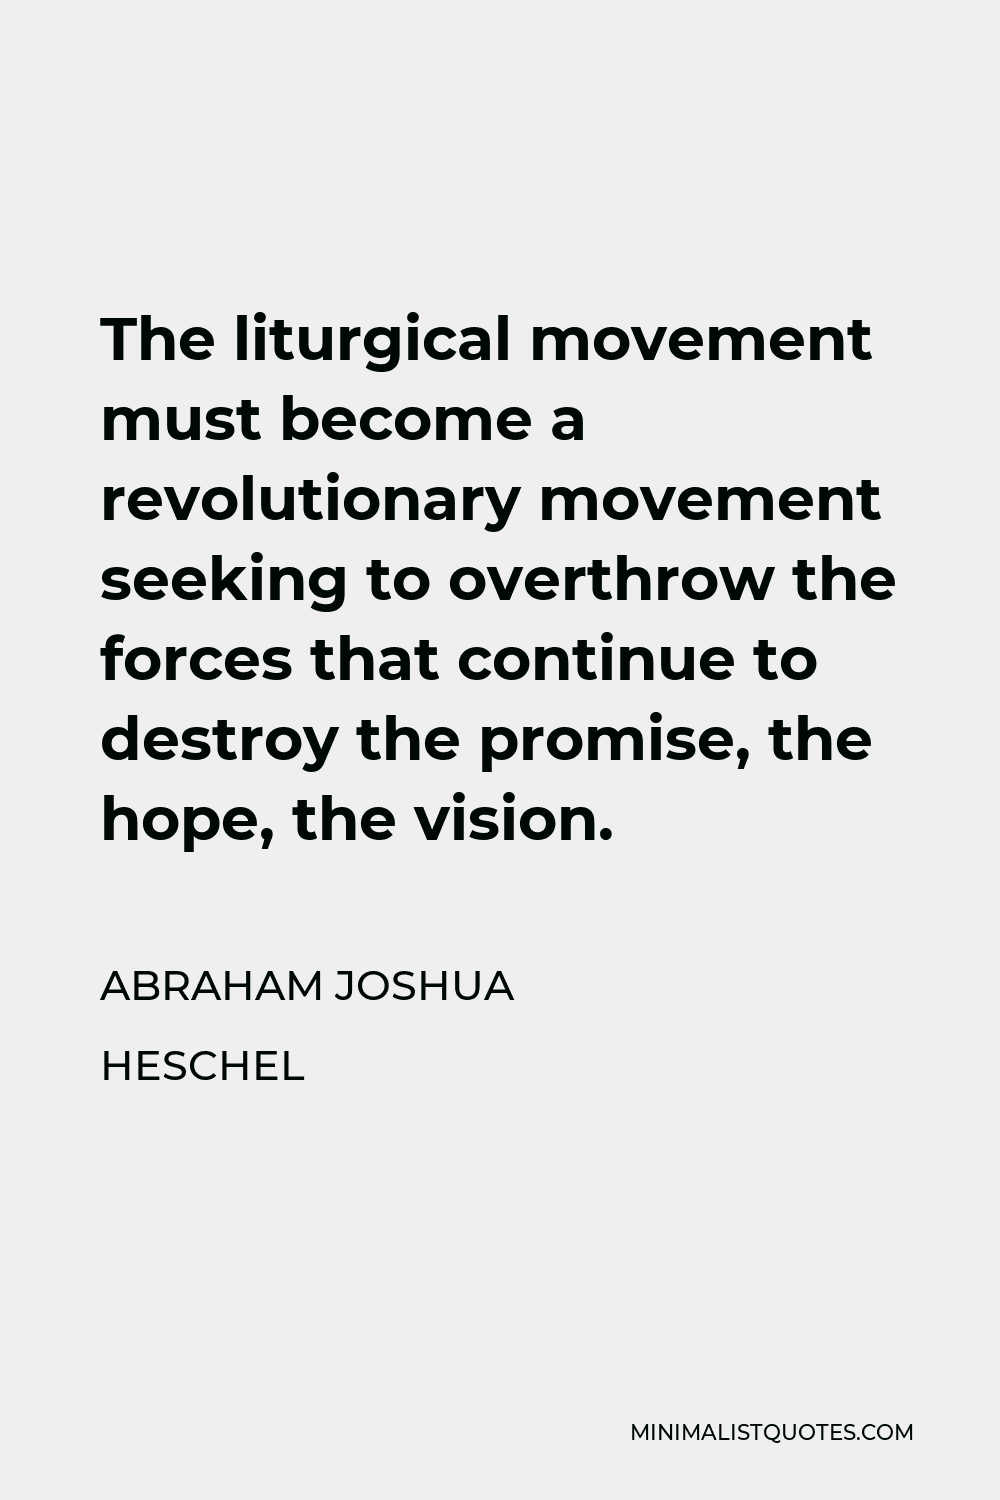 Abraham Joshua Heschel Quote - The liturgical movement must become a revolutionary movement seeking to overthrow the forces that continue to destroy the promise, the hope, the vision.